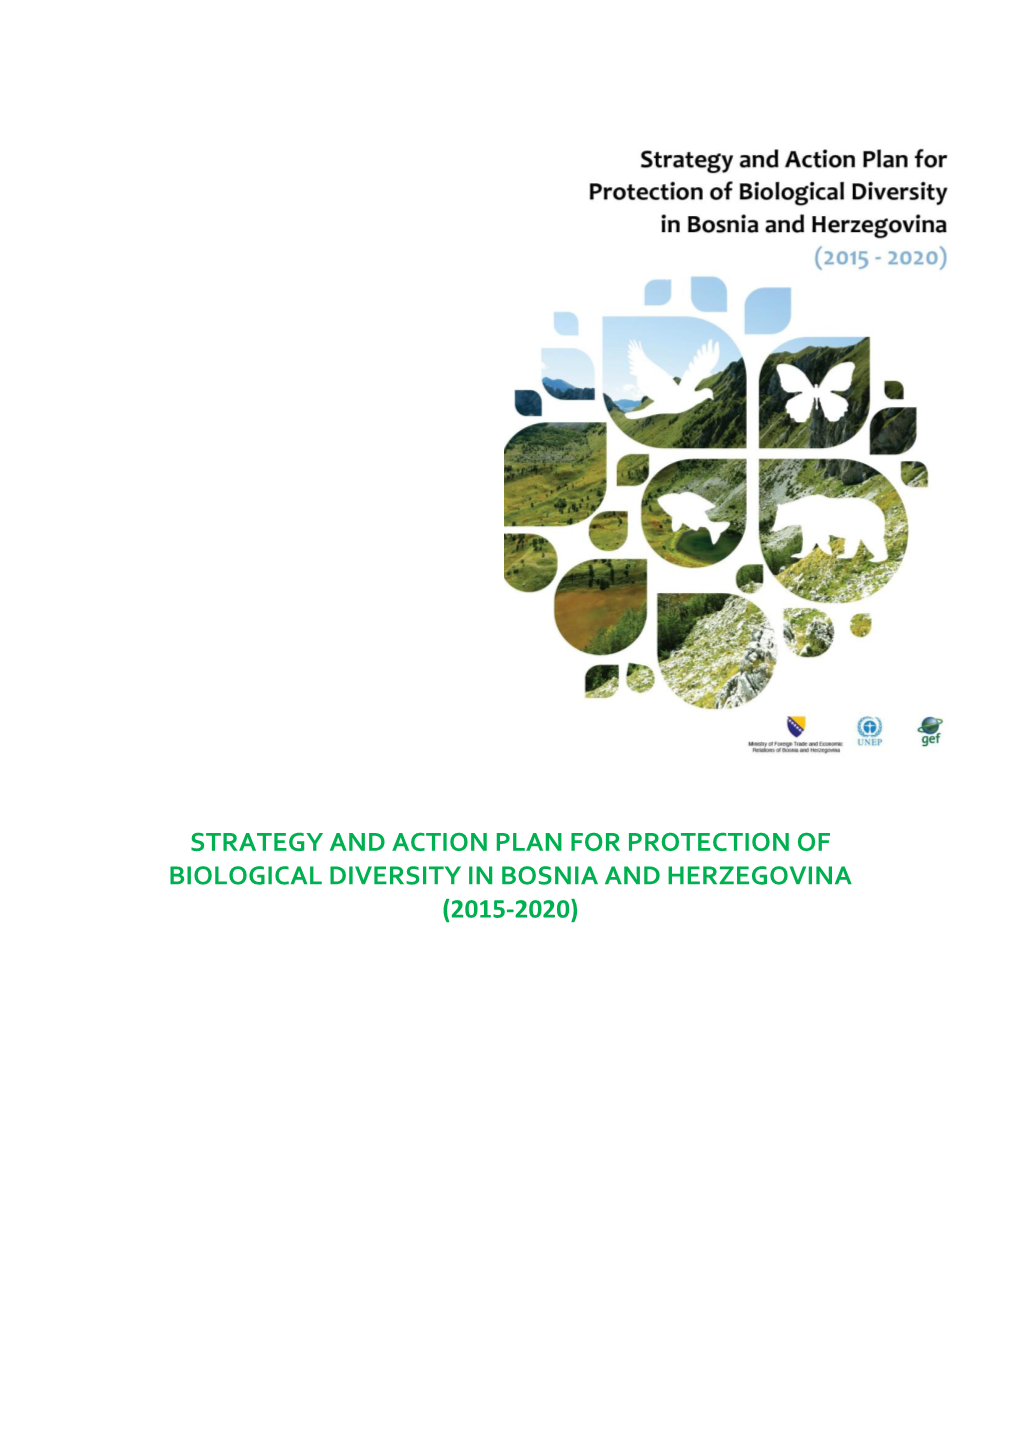 Strategy and Action Plan for Protection of Biological Diversity in Bosnia and Herzegovina (2015-2020)